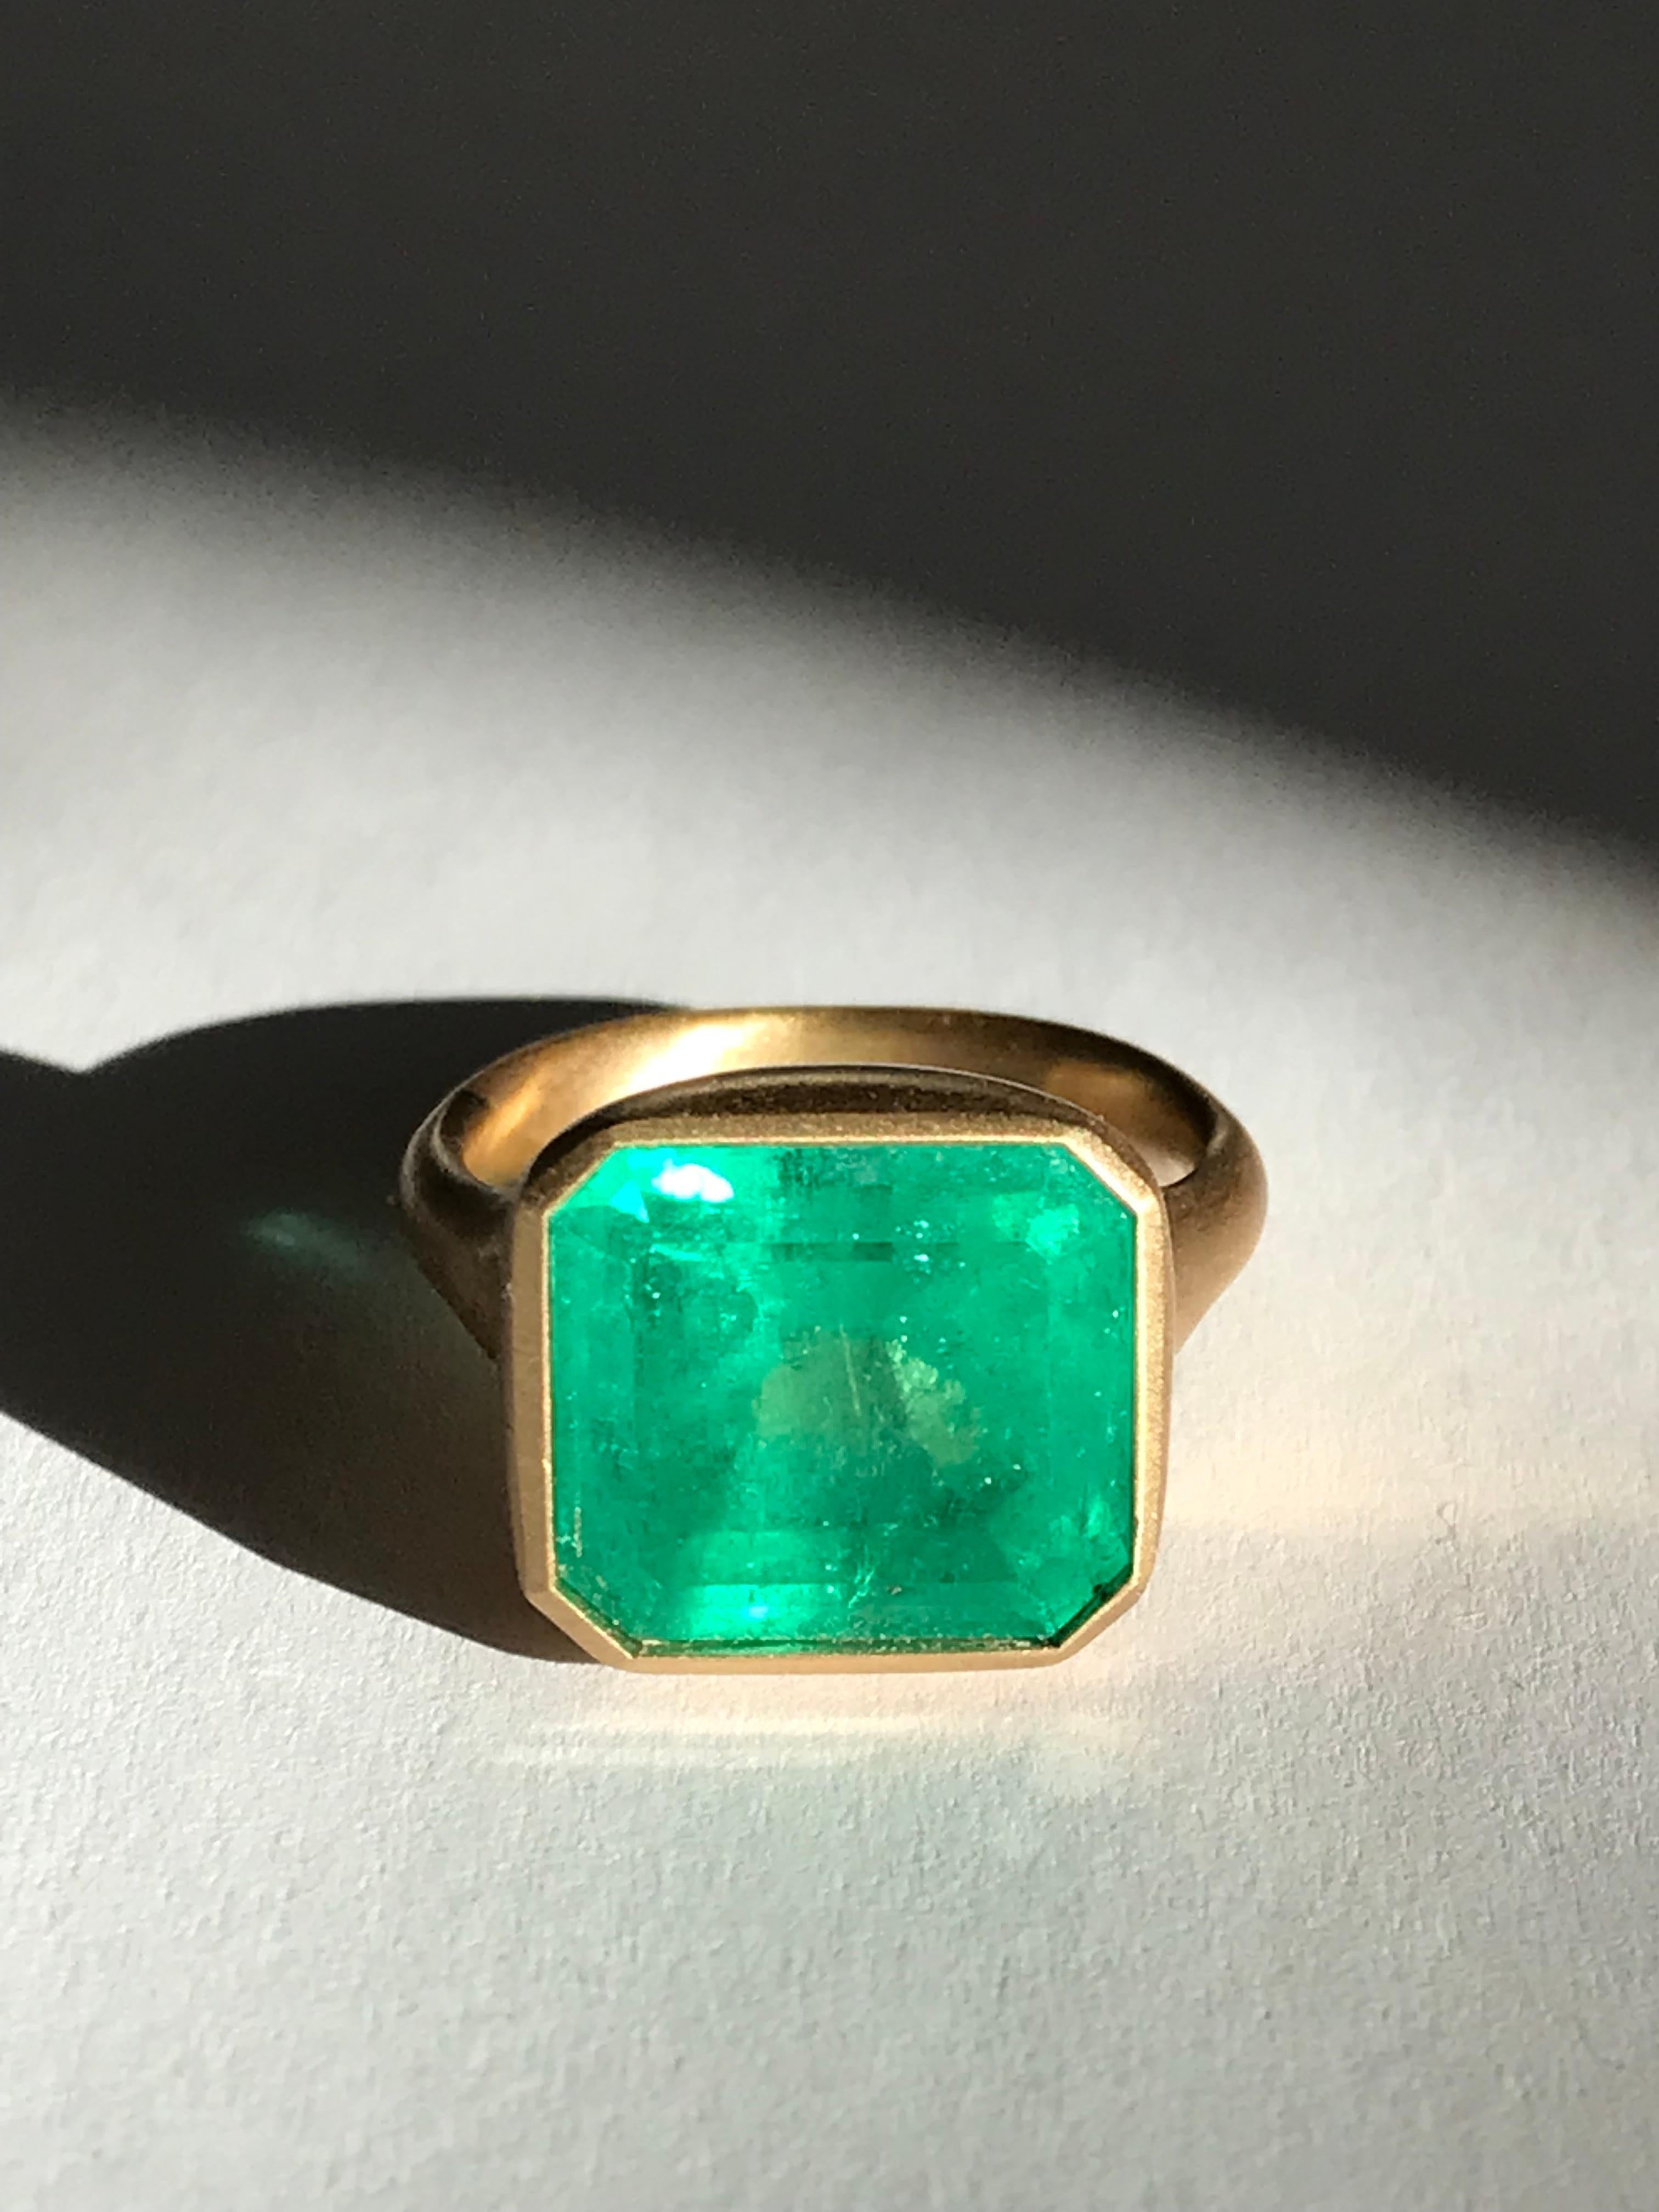 Dalben design One of a Kind 18k yellow gold satin finishing ring with a magnificent 8,3 carat bezel-set emerald cut Colombian emerald. 
The Colombian emerald is accompanied by IGI (Italian Gemological Institute ) Certificate.
Ring size 7 1/4 USA -